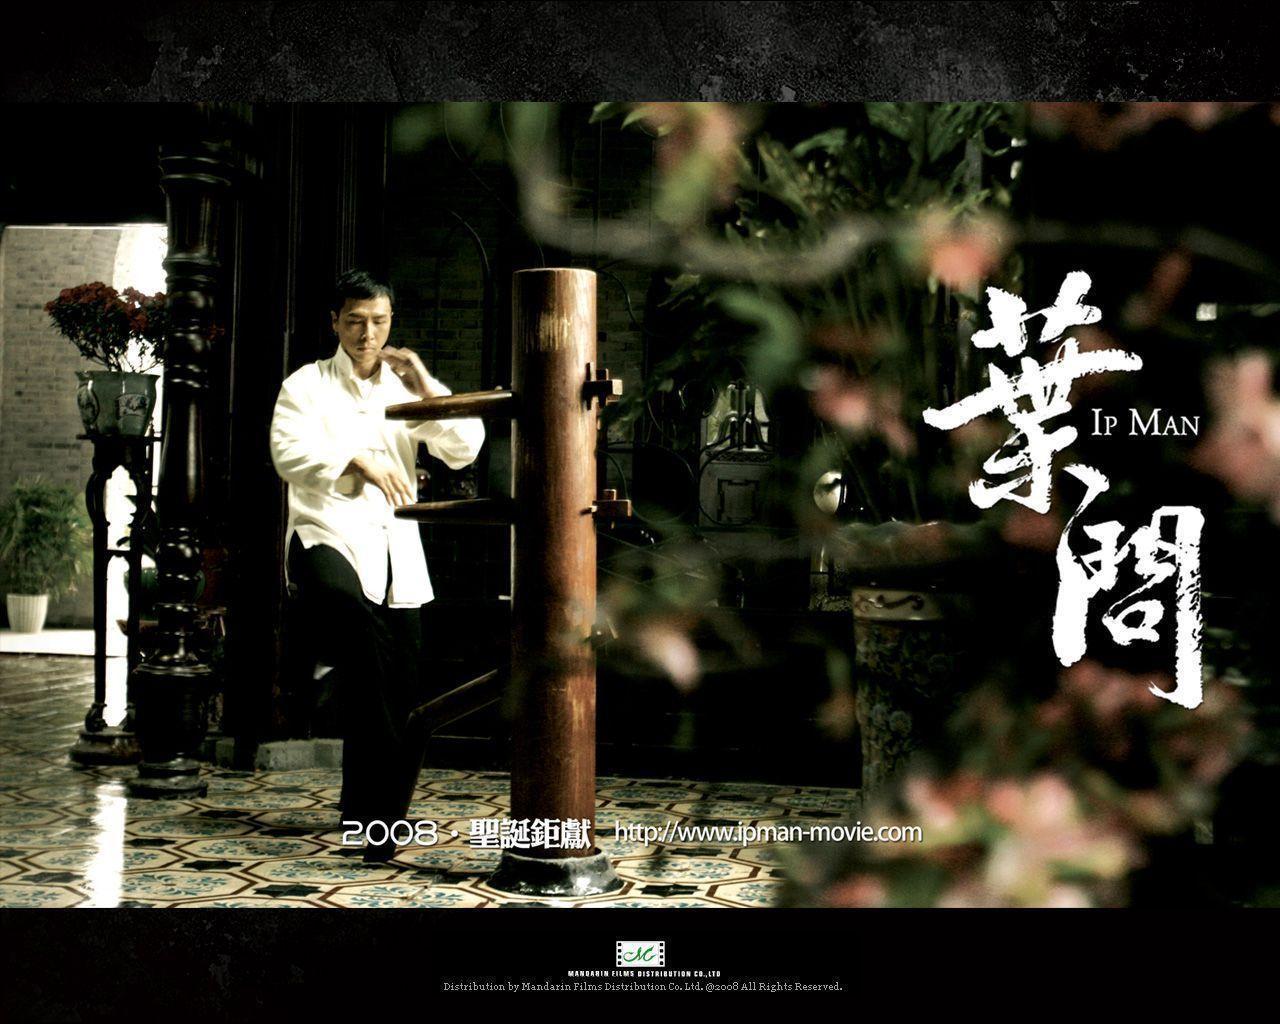 Wing Chun Wallpaper (Picture)